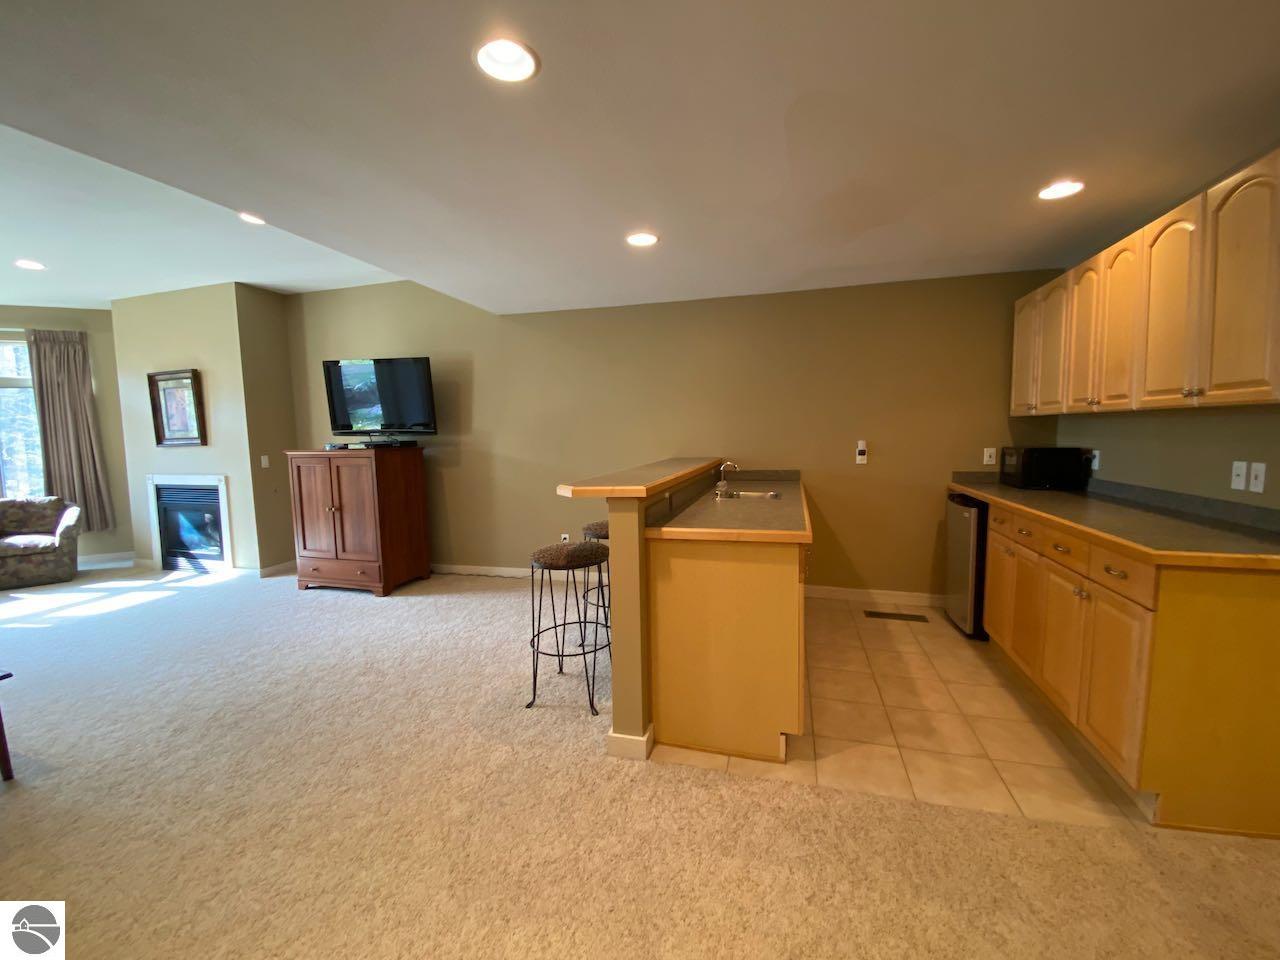 2280 Troon South, Bellaire, MI 49615 photo 38 of 58